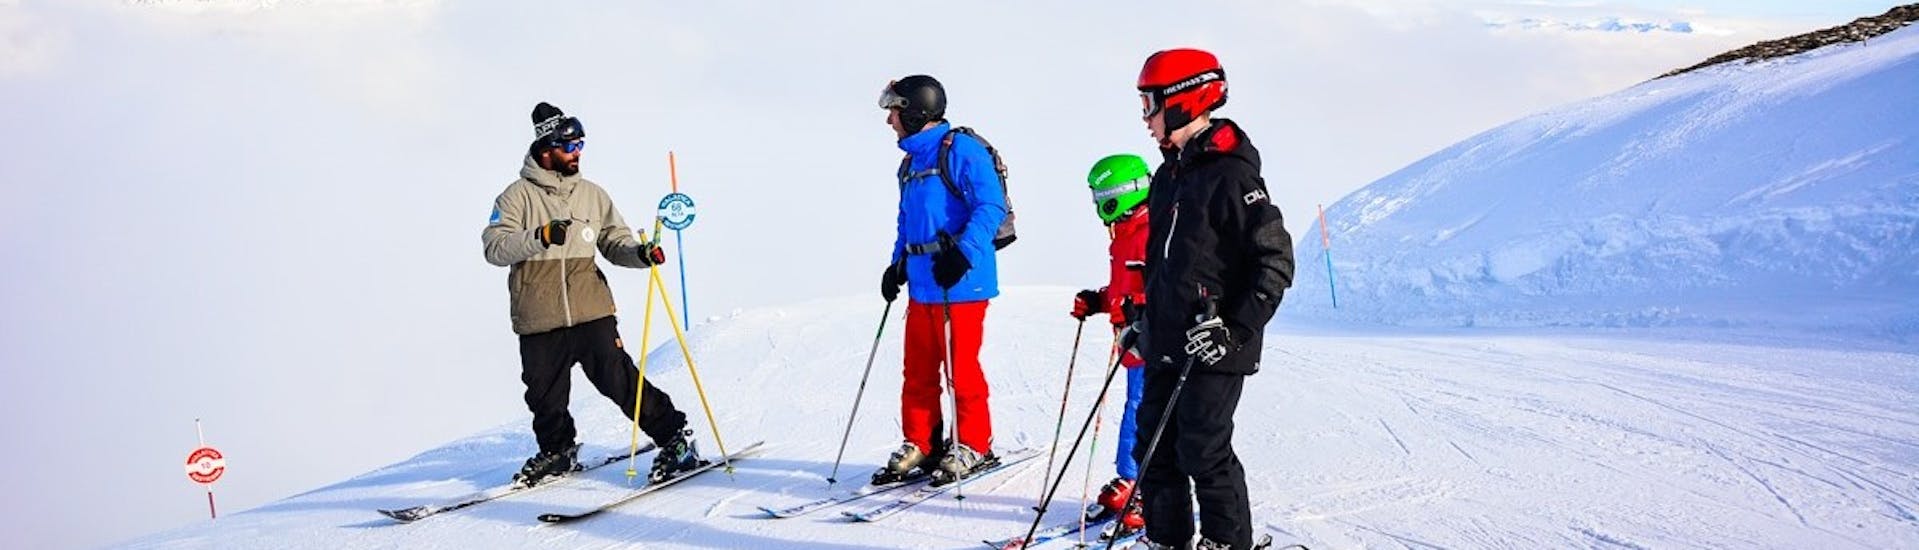 Adult Ski Lessons (from 15 y.) for First-Timers.